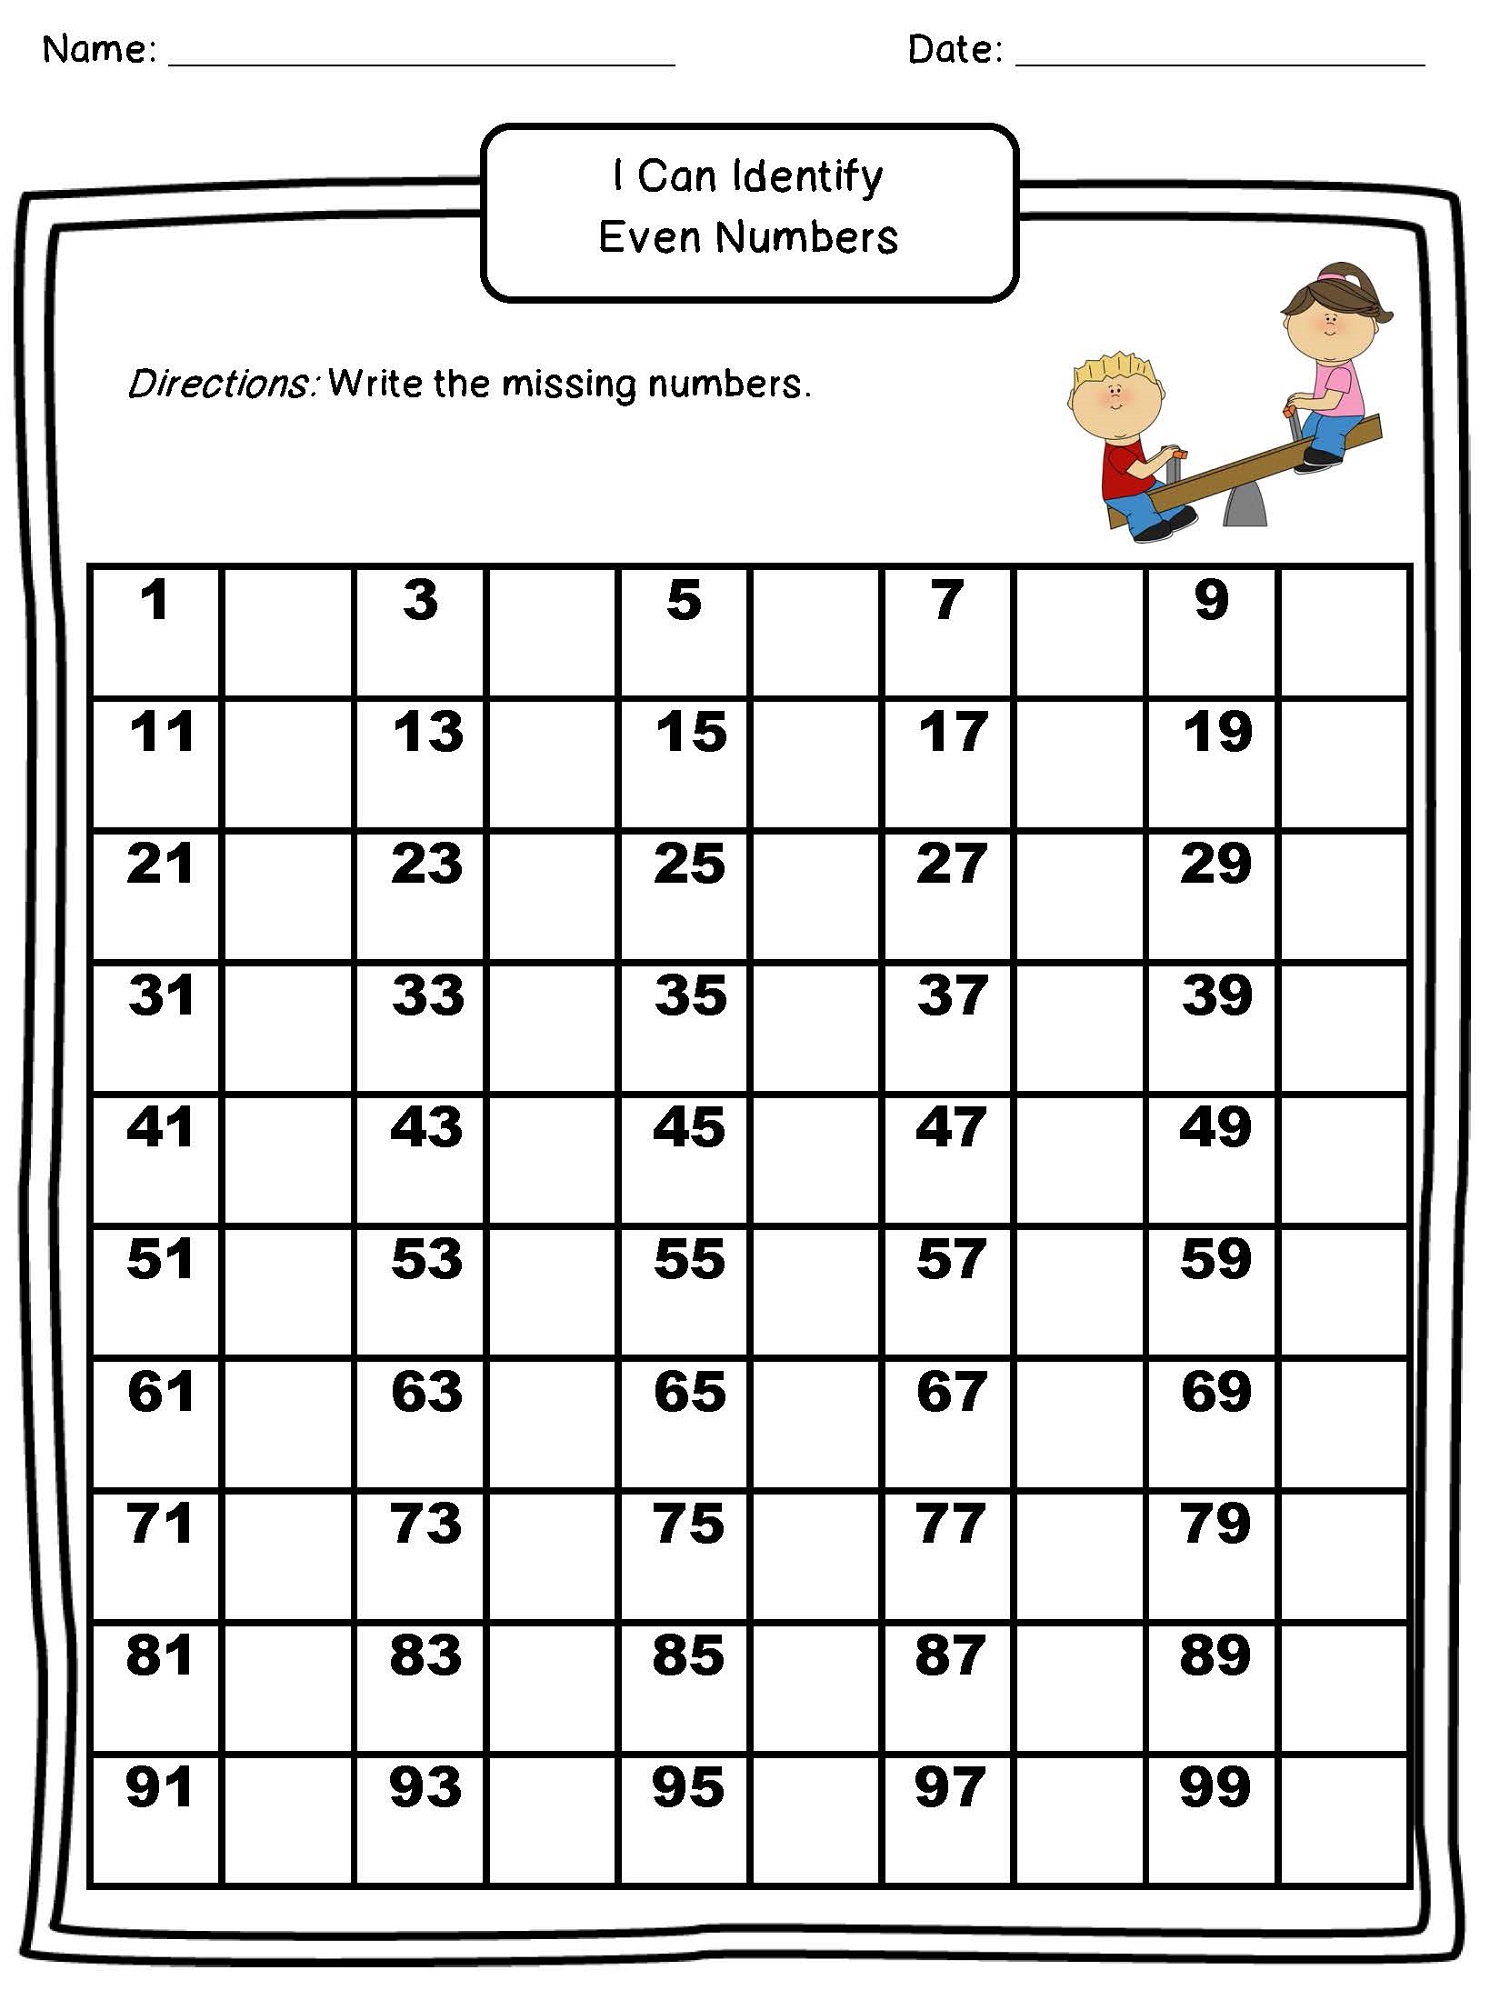 Odd And Even Numbers Free Printable Worksheets